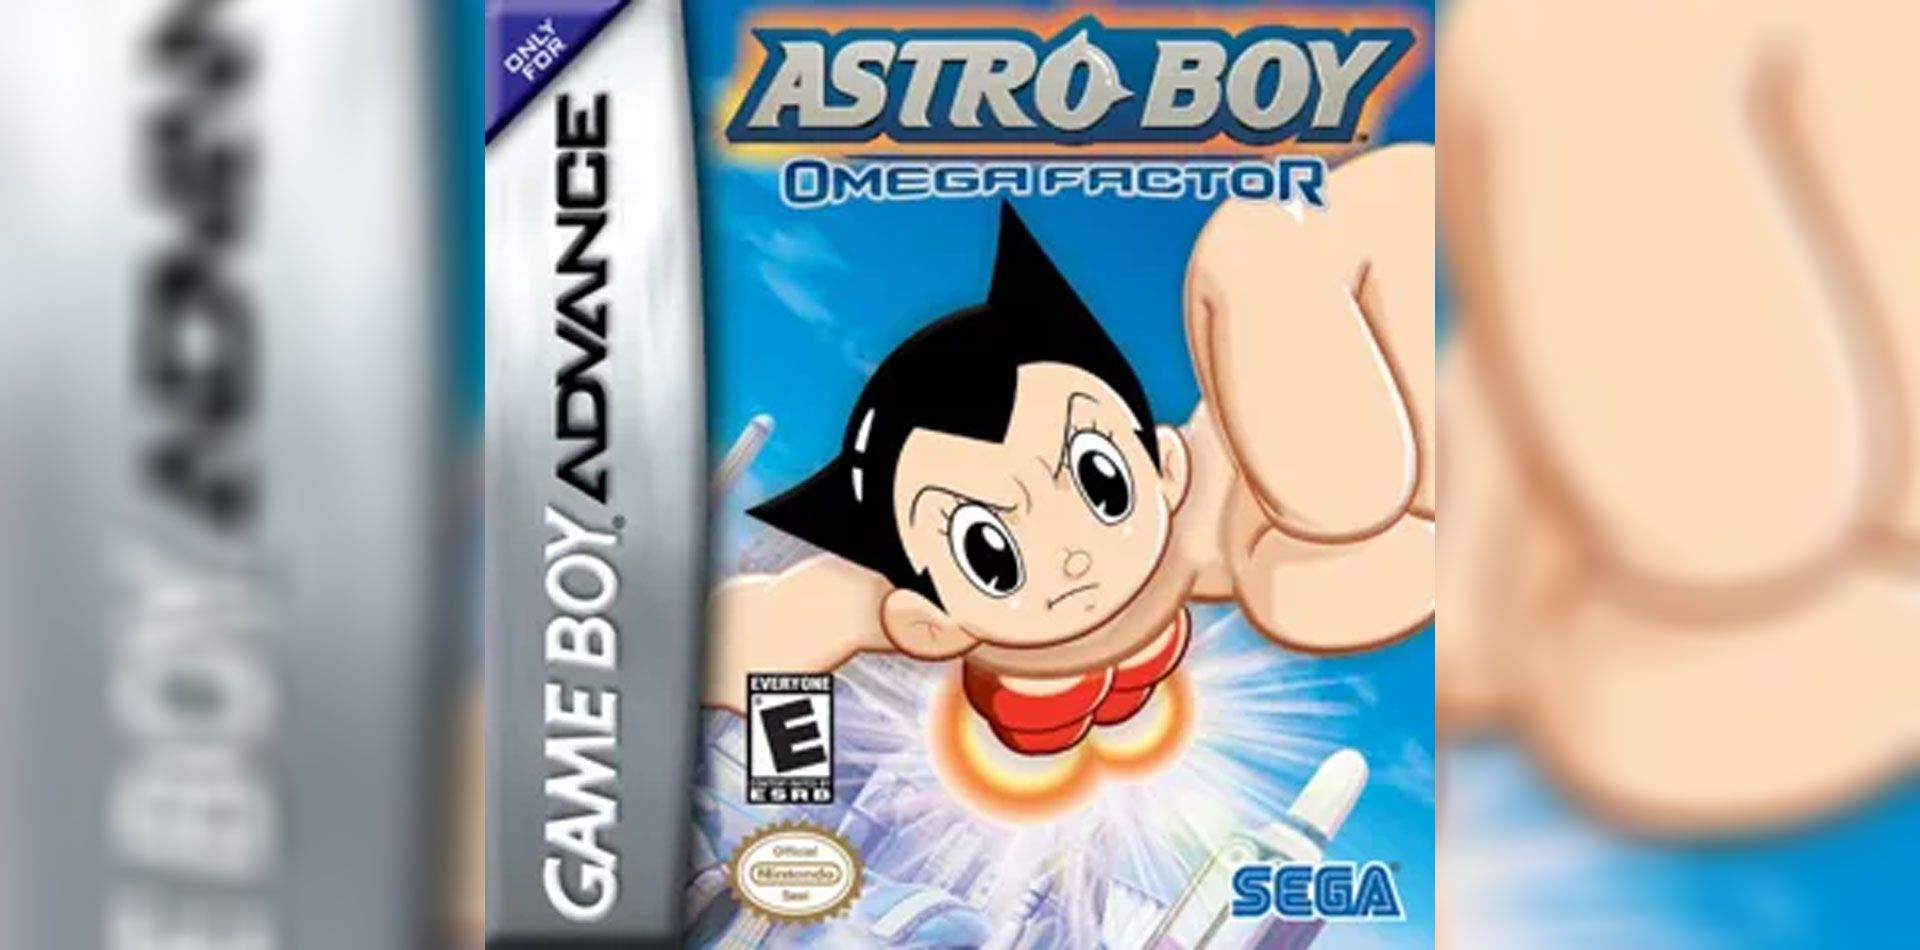 Astroboy for the Game Boy Advance flying in the sky. 